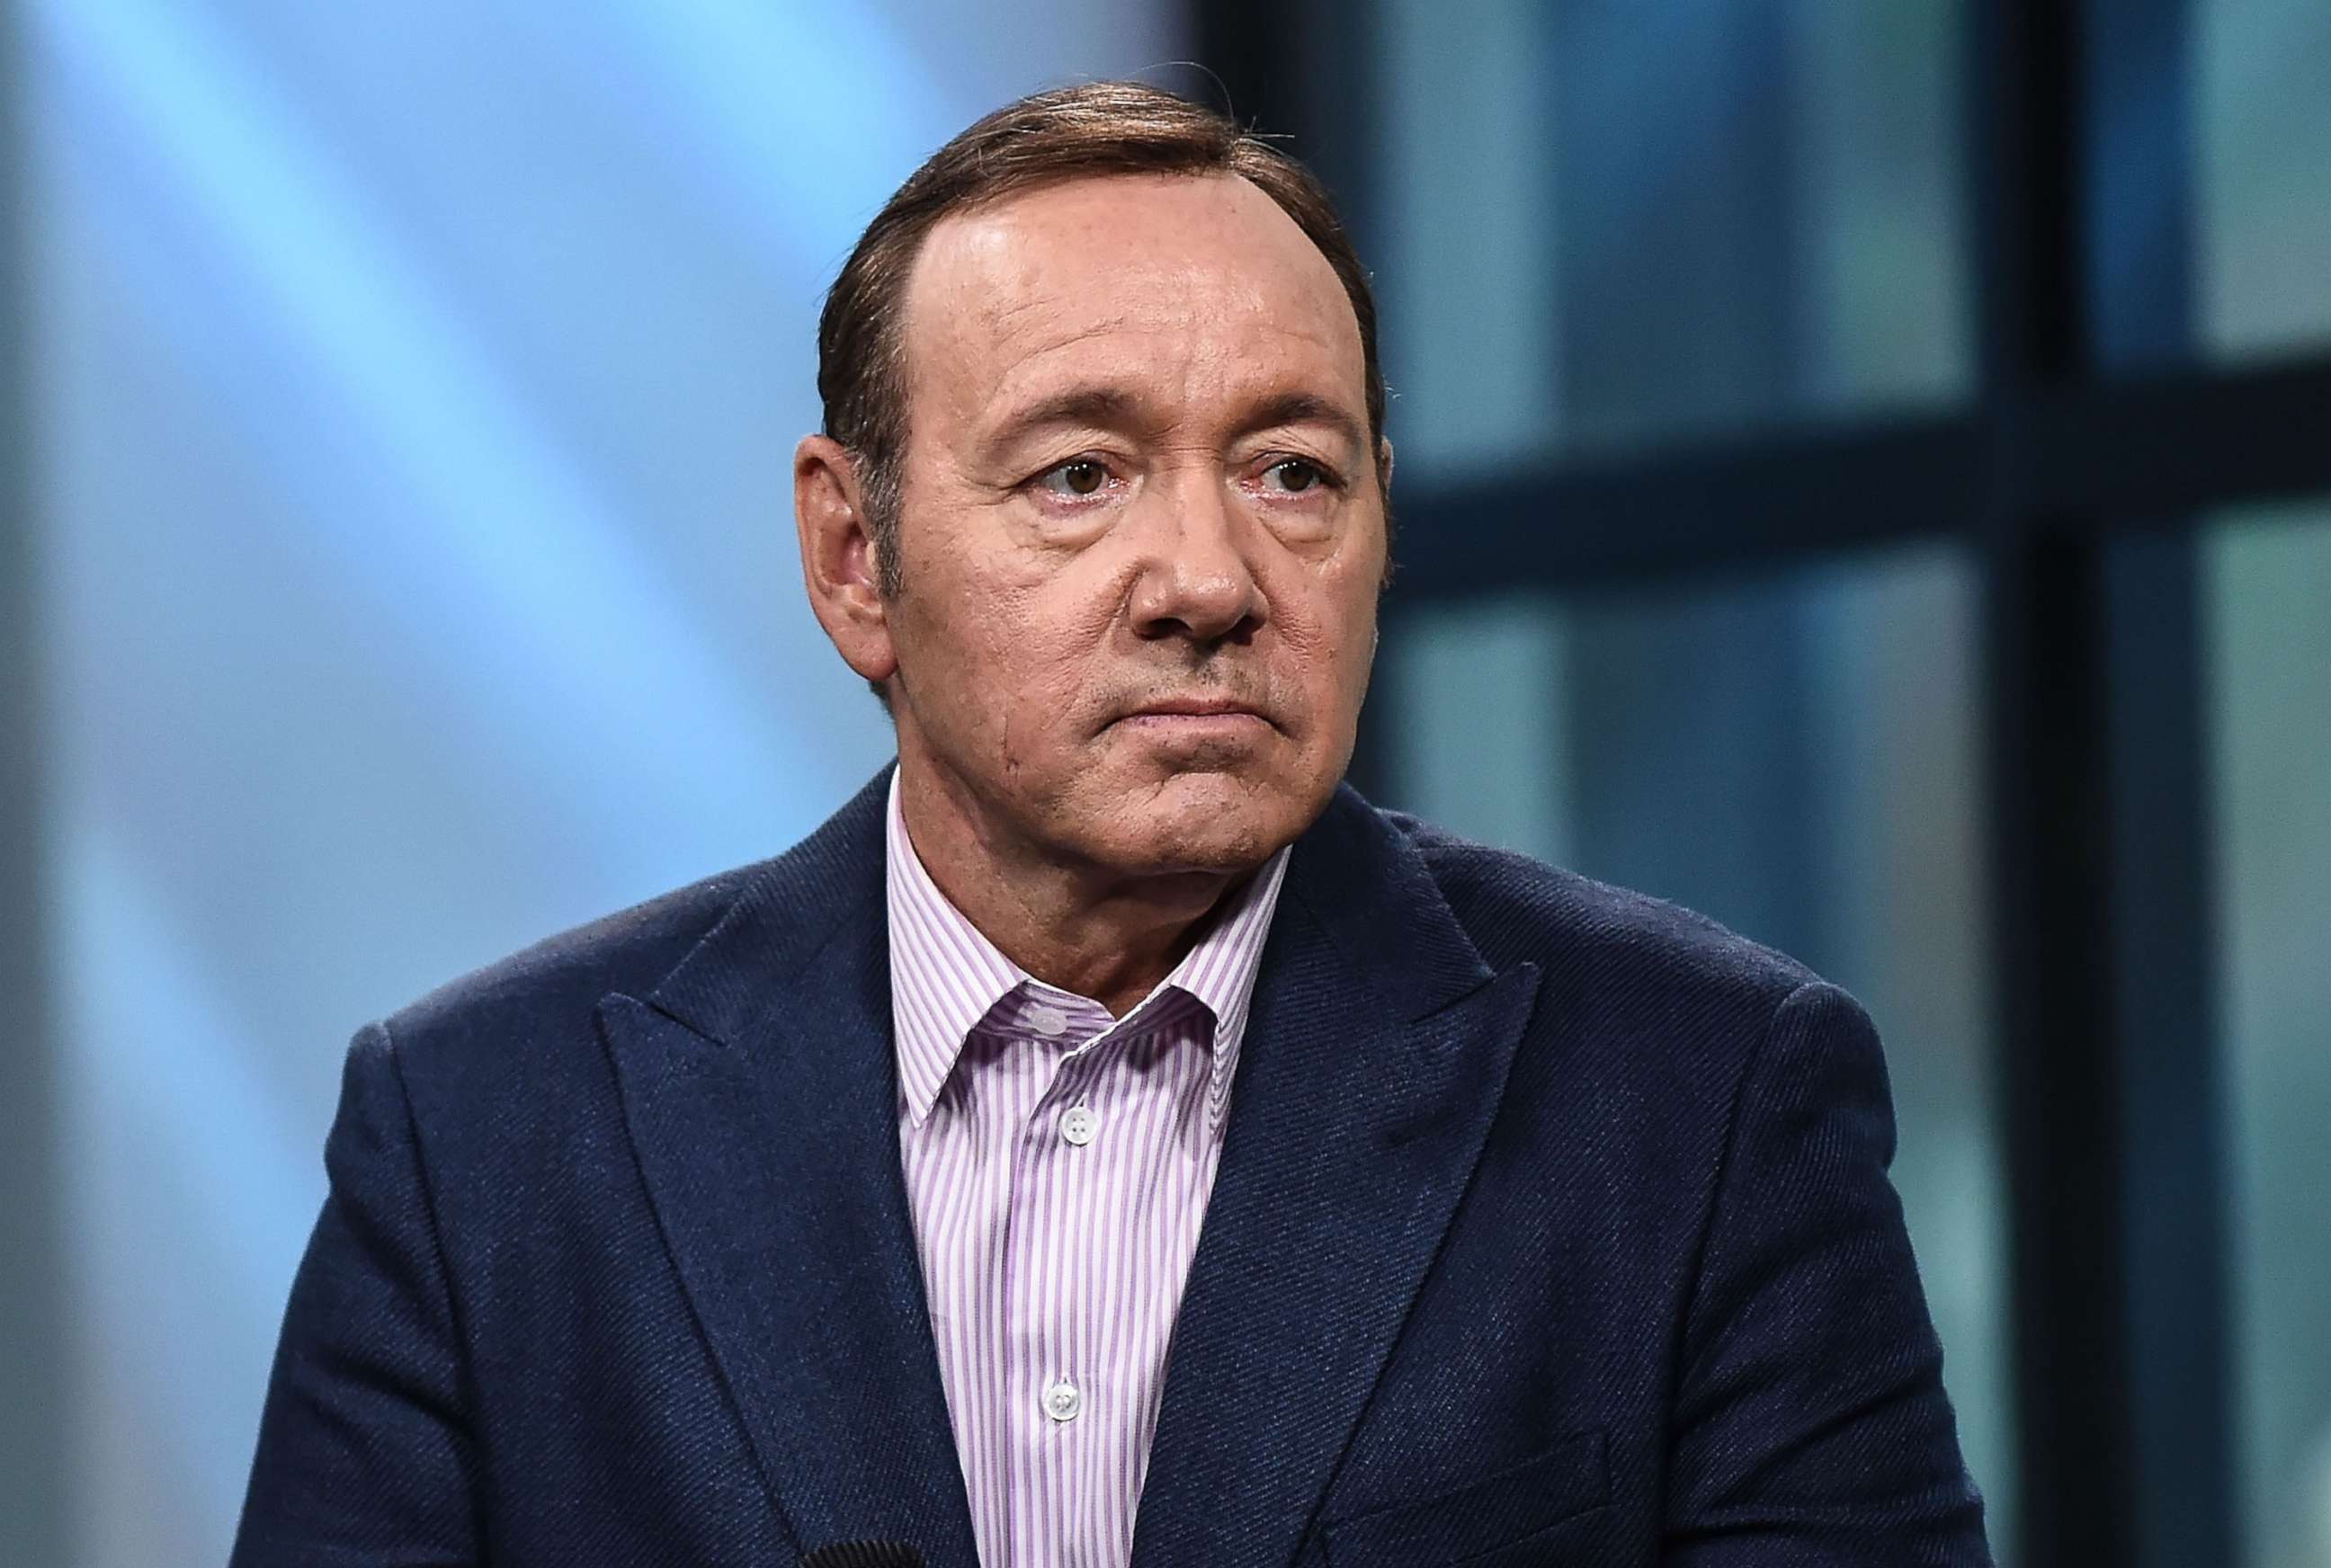 PHOTO: Kevin Spacey discusses speaks during an interview in New York City, May 24, 2017.